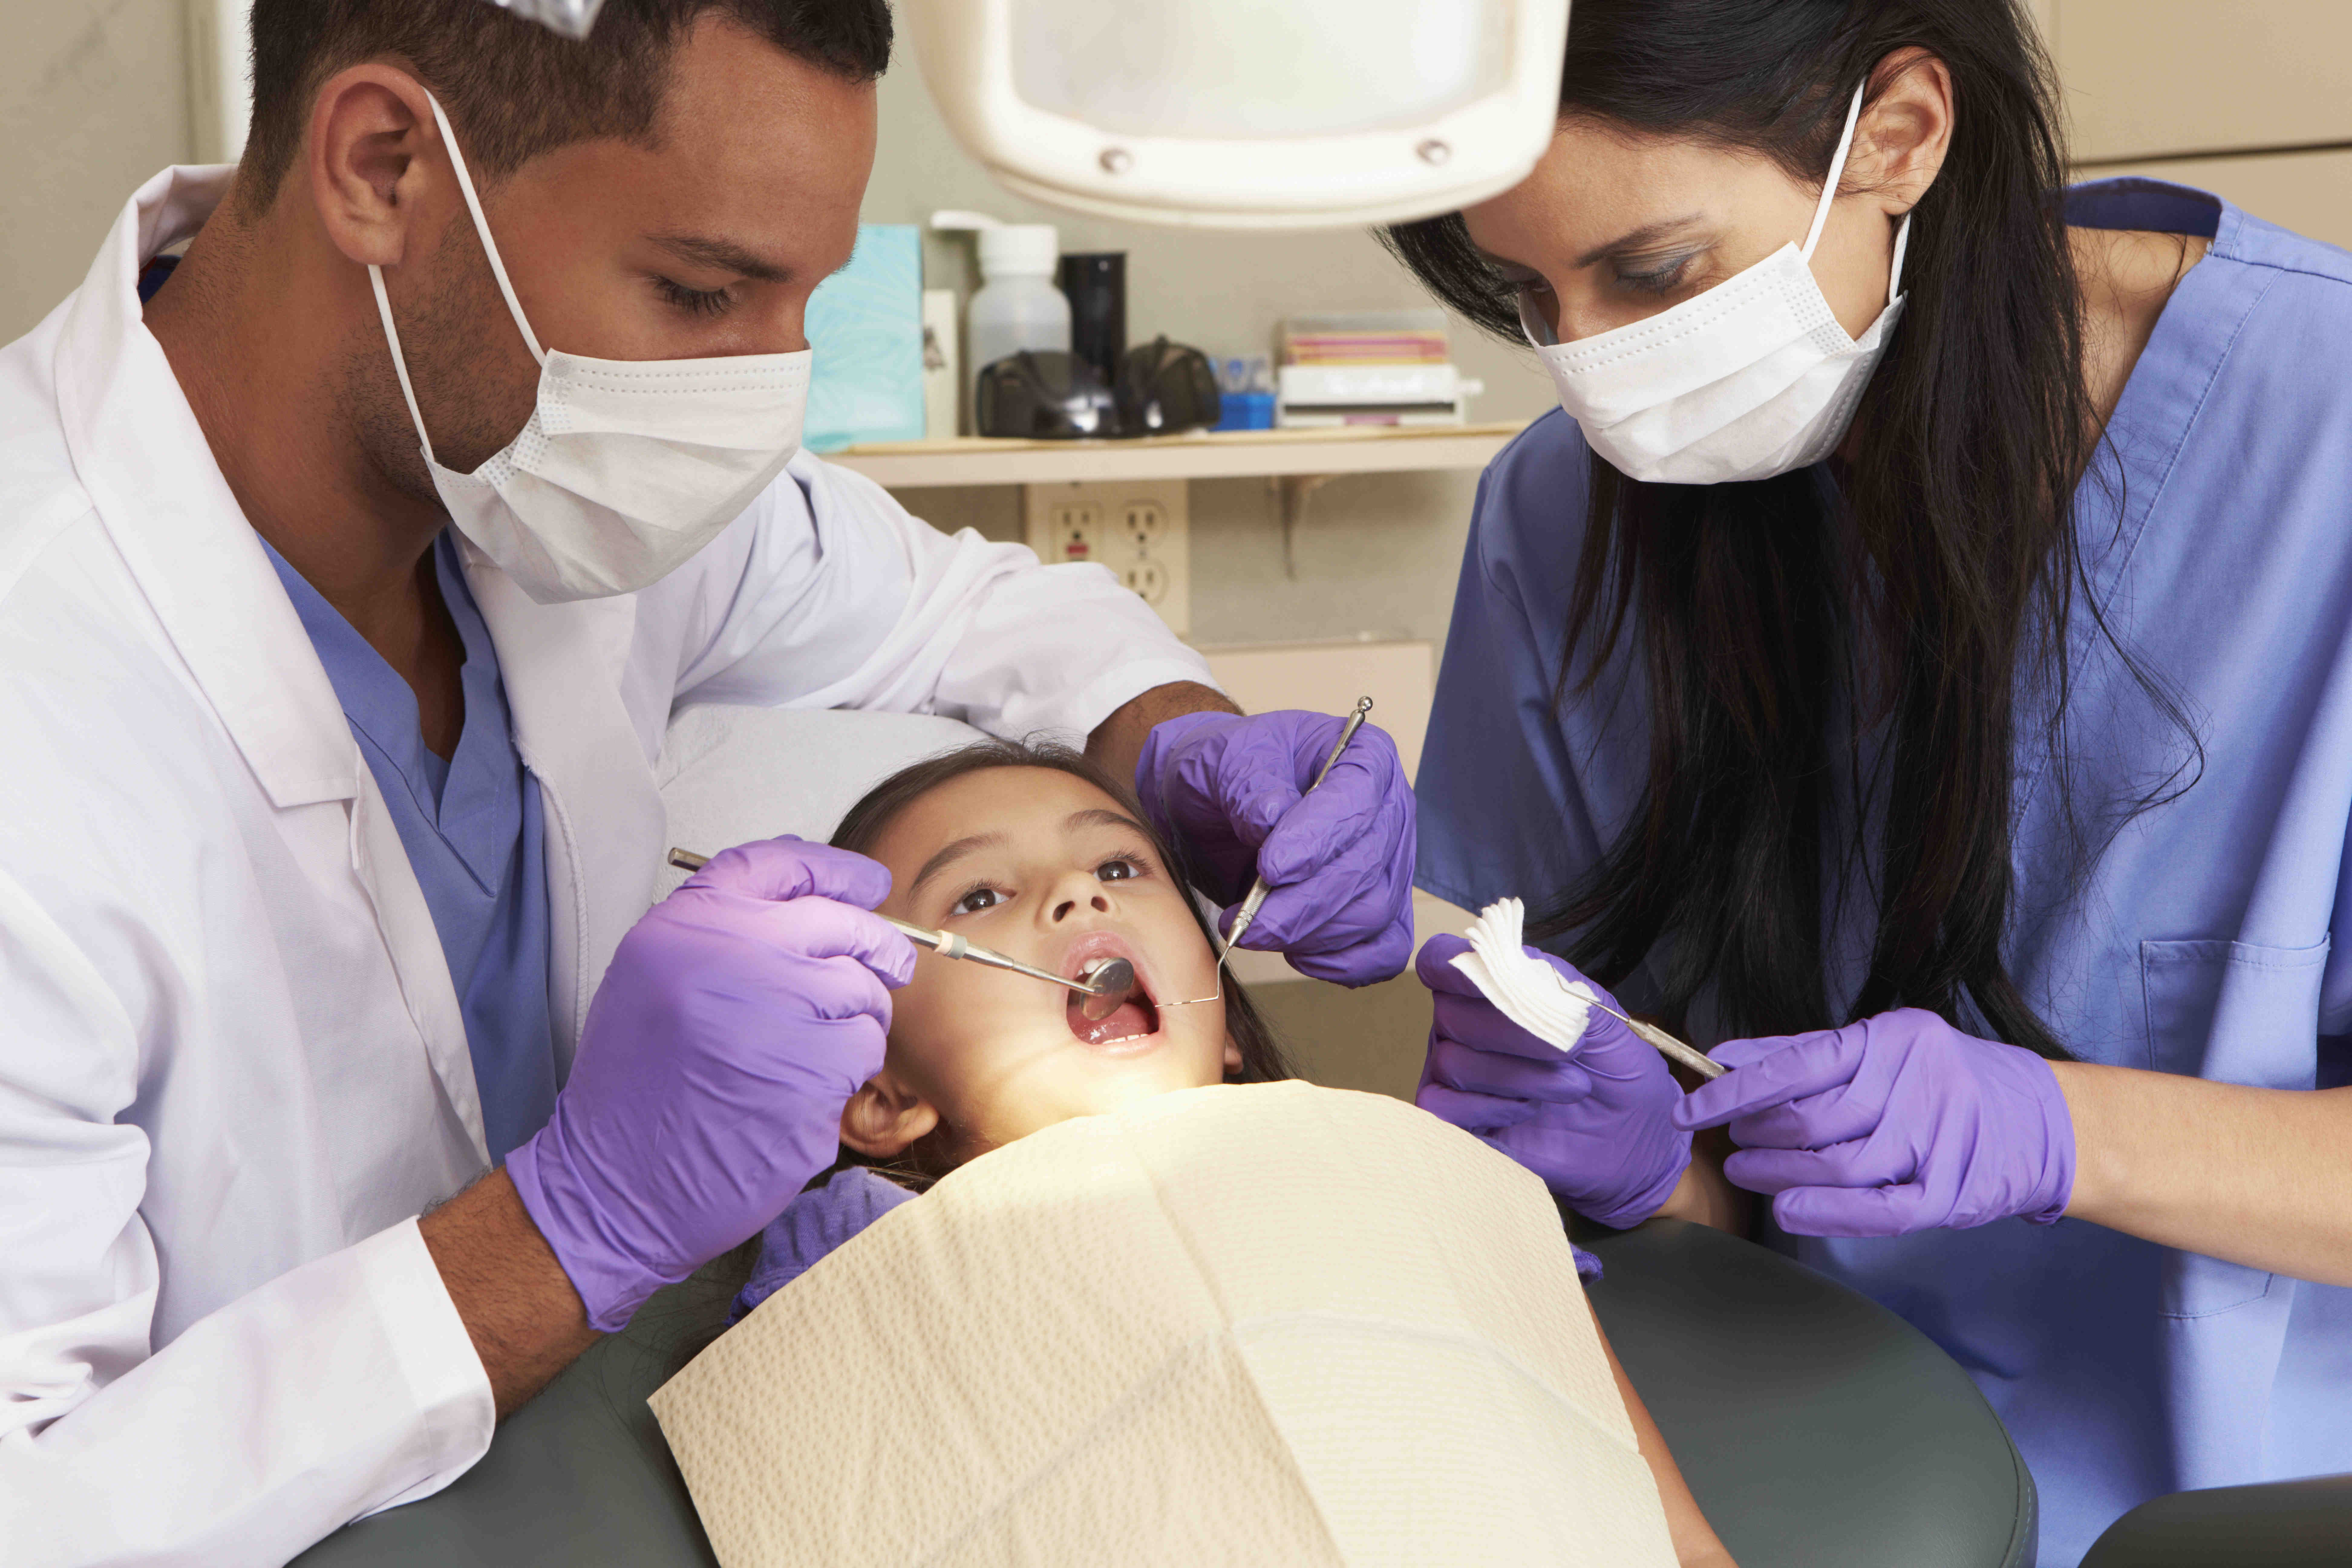 How much is an emergency NHS dentist appointment?